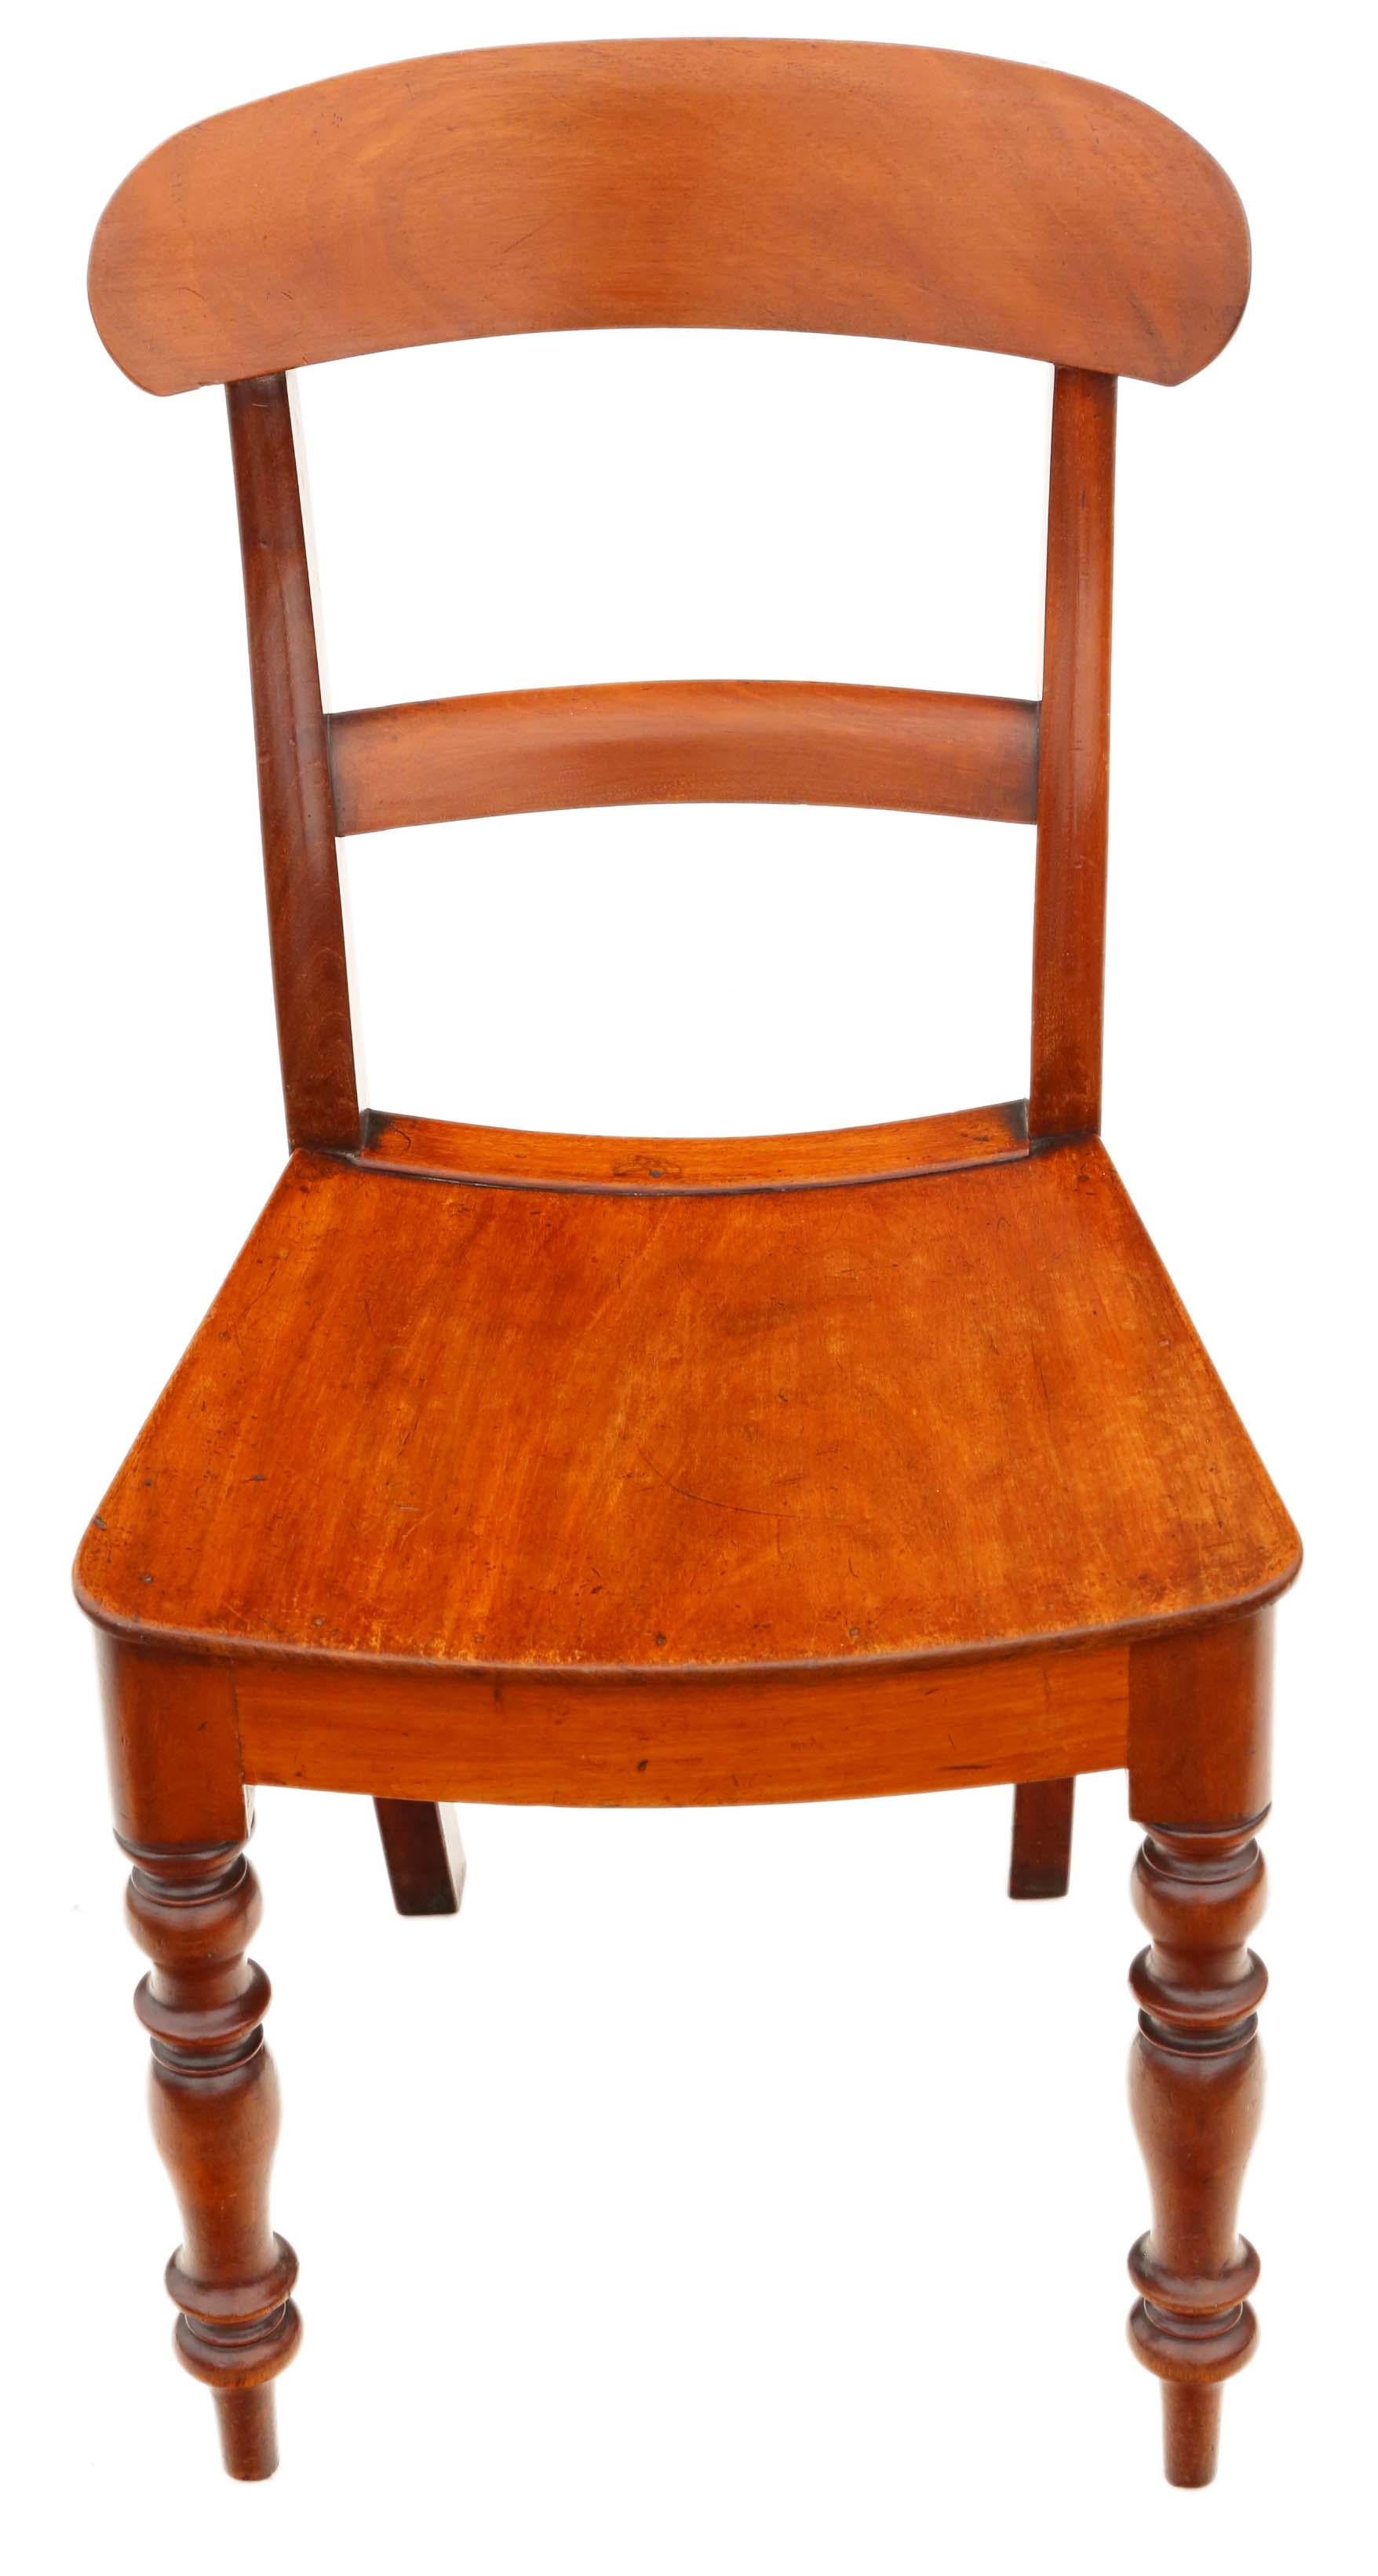 Mid-19th Century Set of 8 19th Century Mahogany Dining Chairs - Antique Quality For Sale